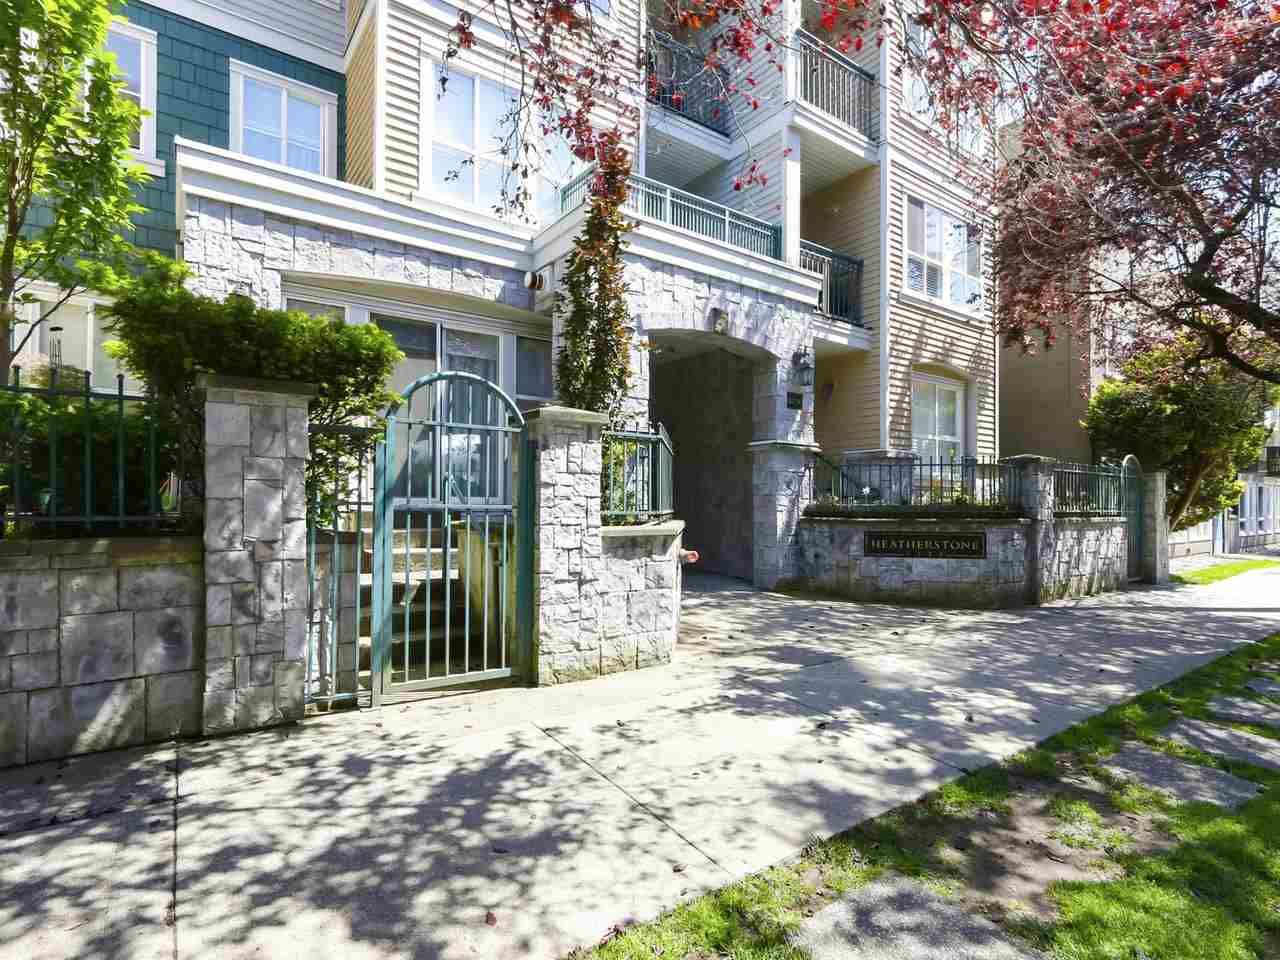 Main Photo: 407 3278 HEATHER STREET in : Cambie Condo for sale : MLS®# R2461331